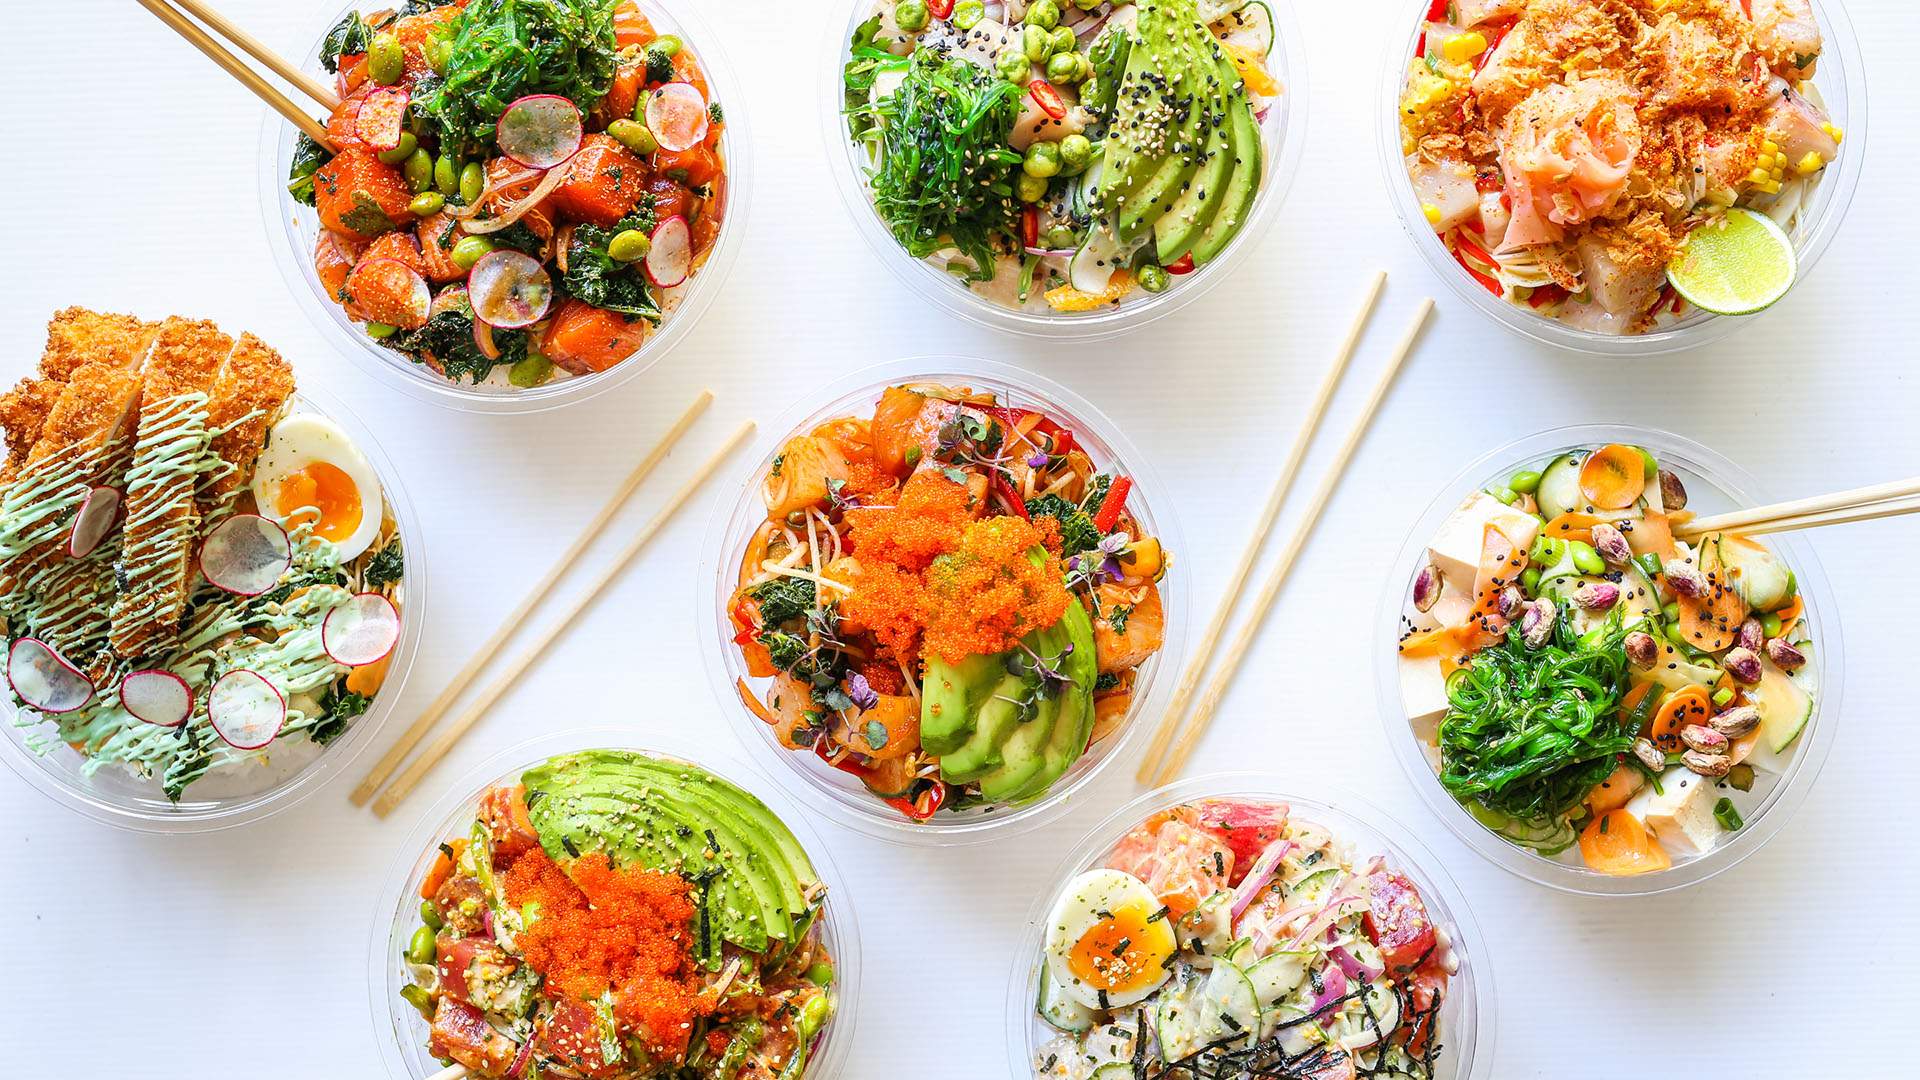 Suki Expands Its Make-Your-Own Poke Bowls and Sushi Burritos Empire to Newstead